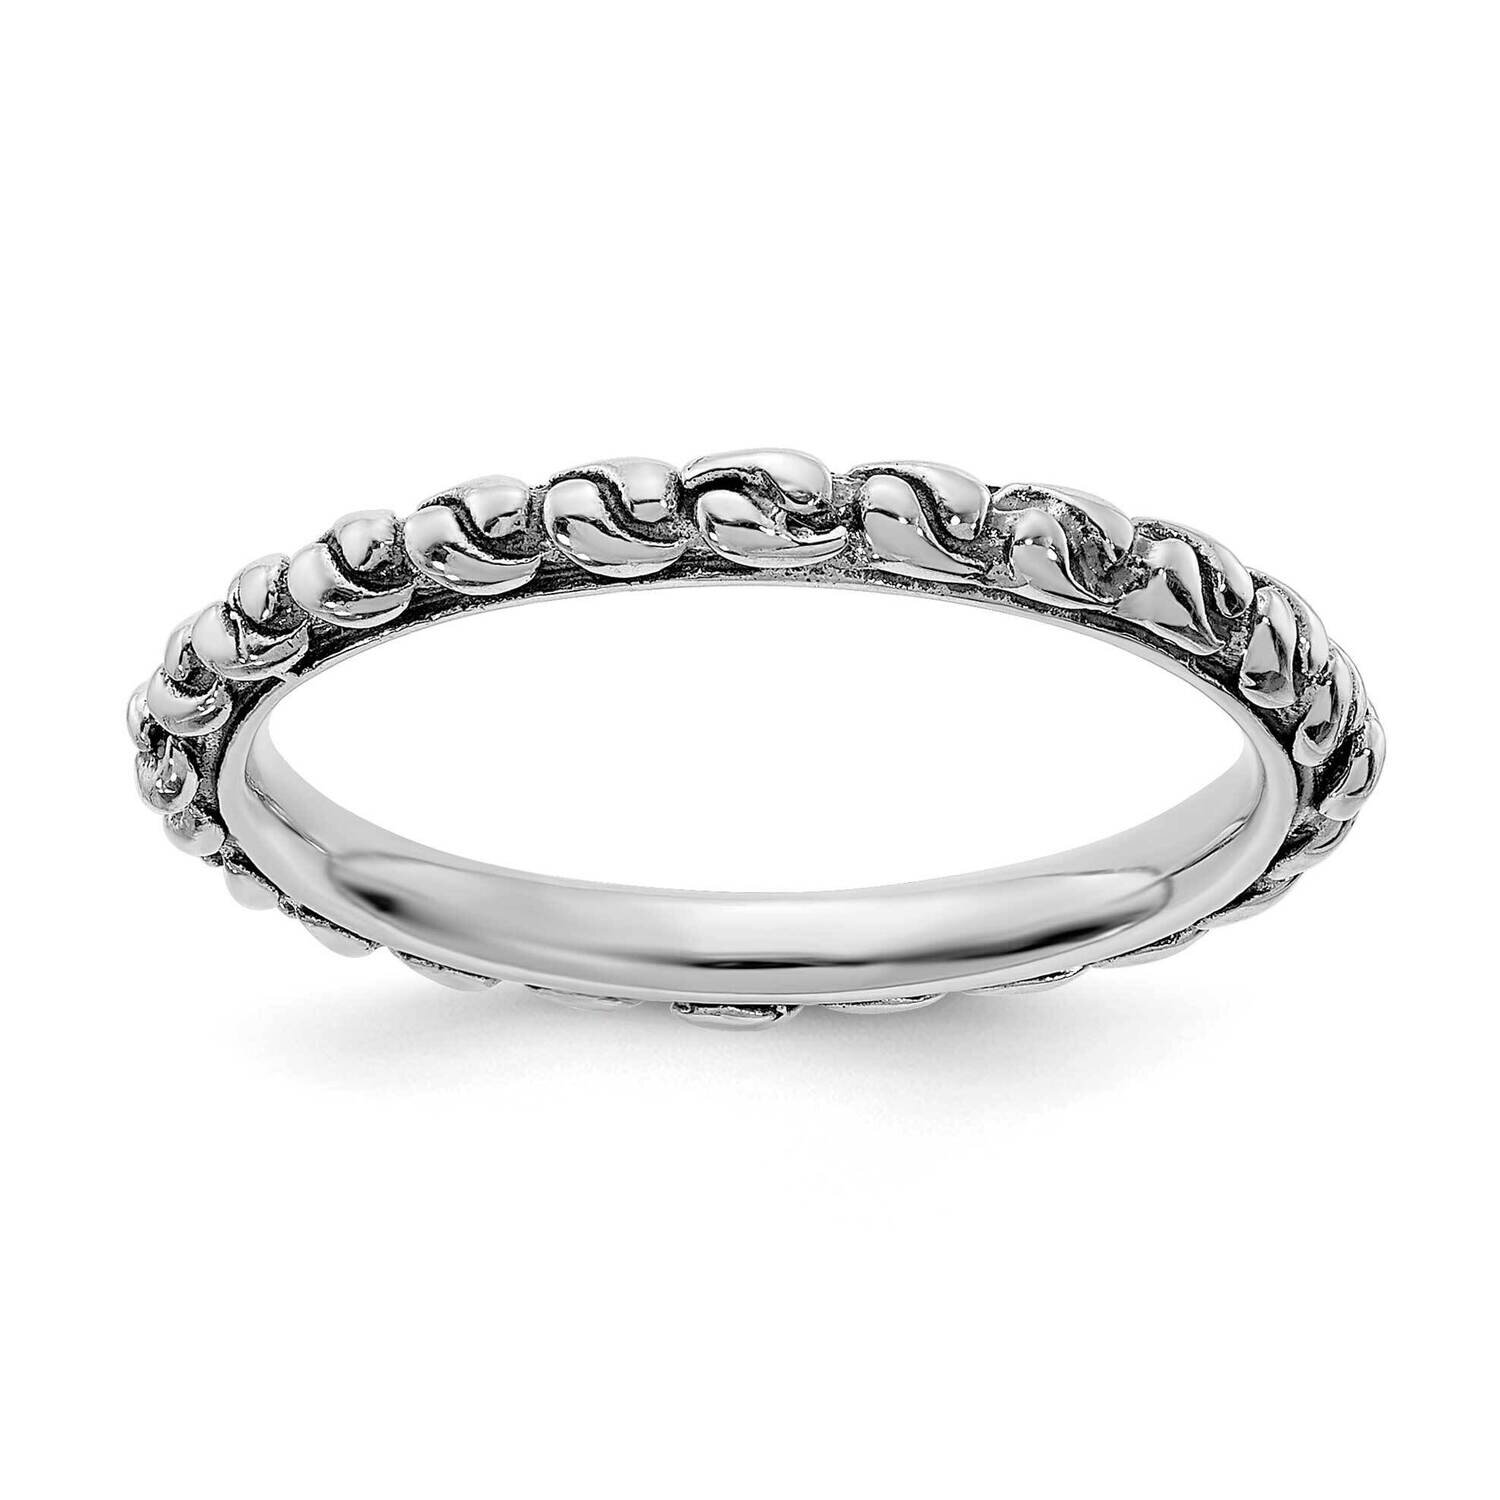 Stackable Expr Polished Swirl Antiqued Eternity Ring Sterling Silver QSK2063